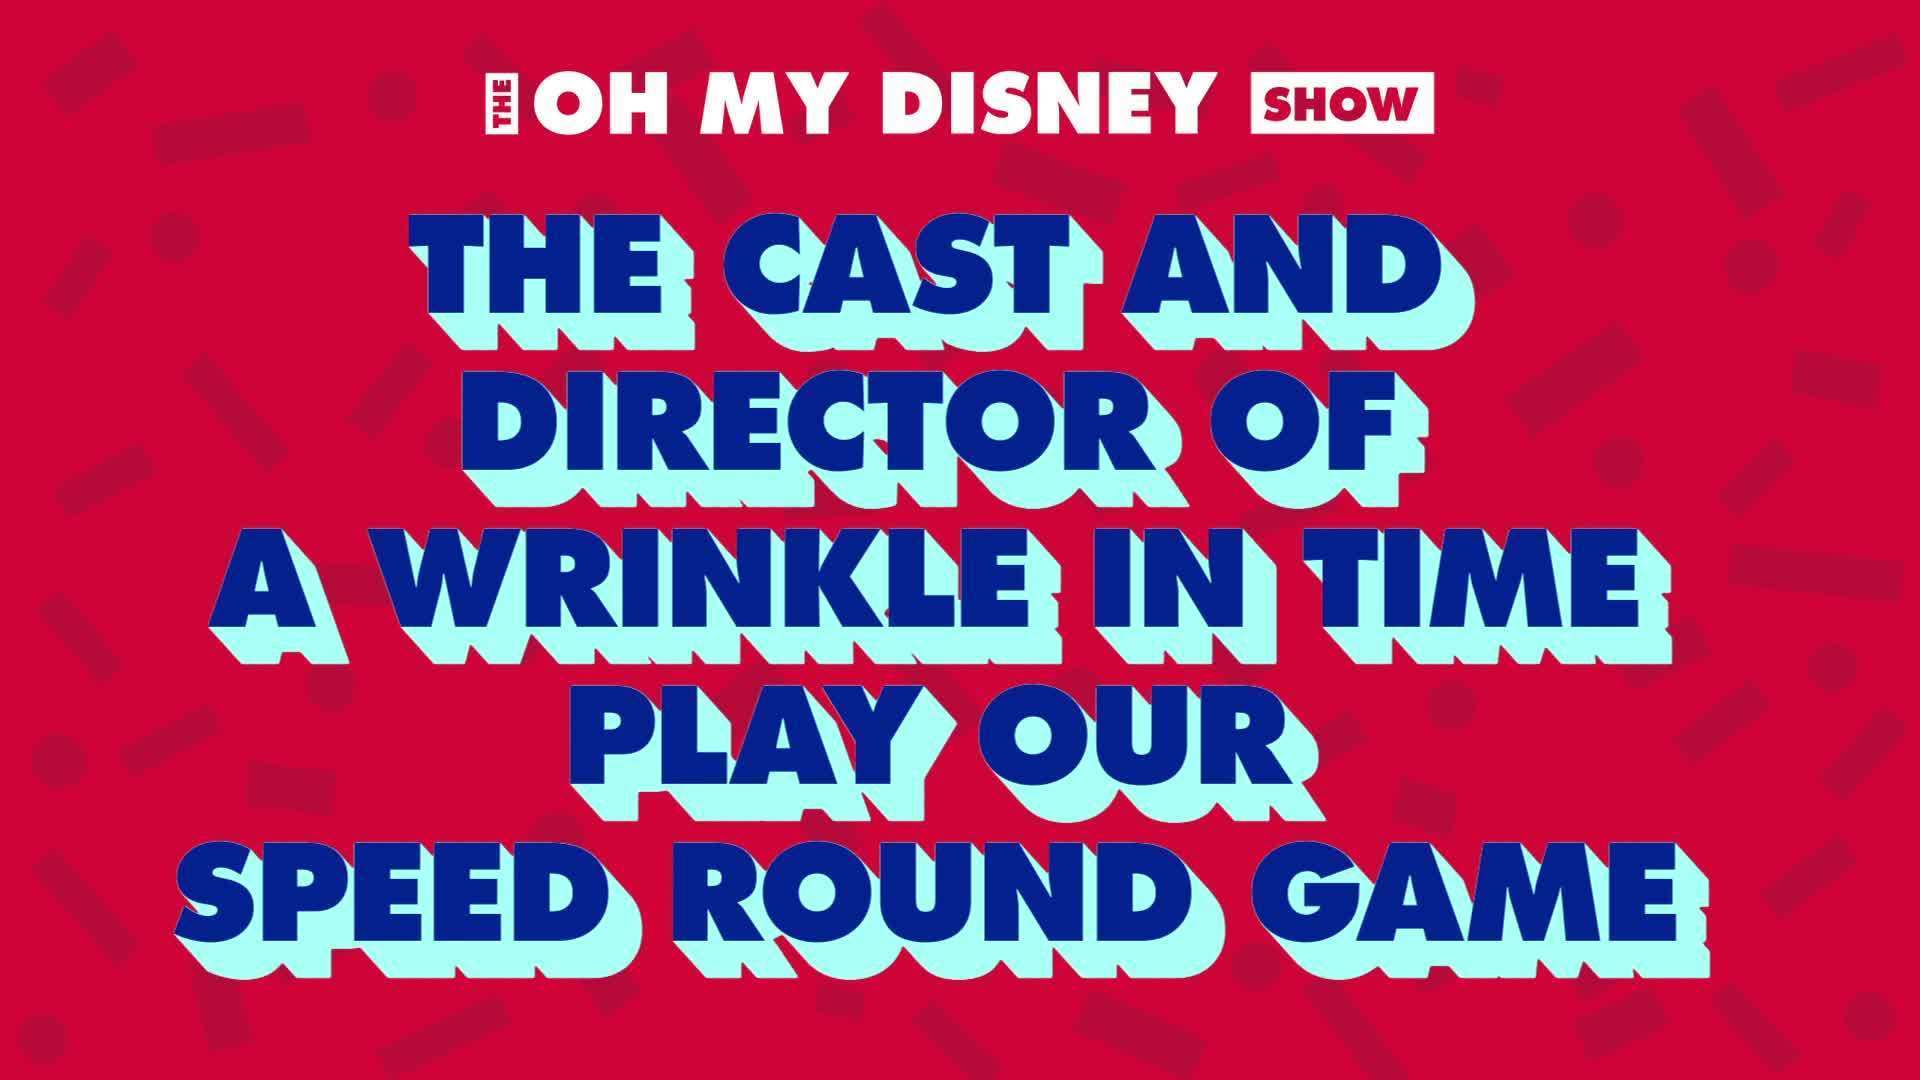 The Cast and Director of A Wrinkle in Time Play Our Speed Round Game | Oh My Disney Show by Oh My Disney